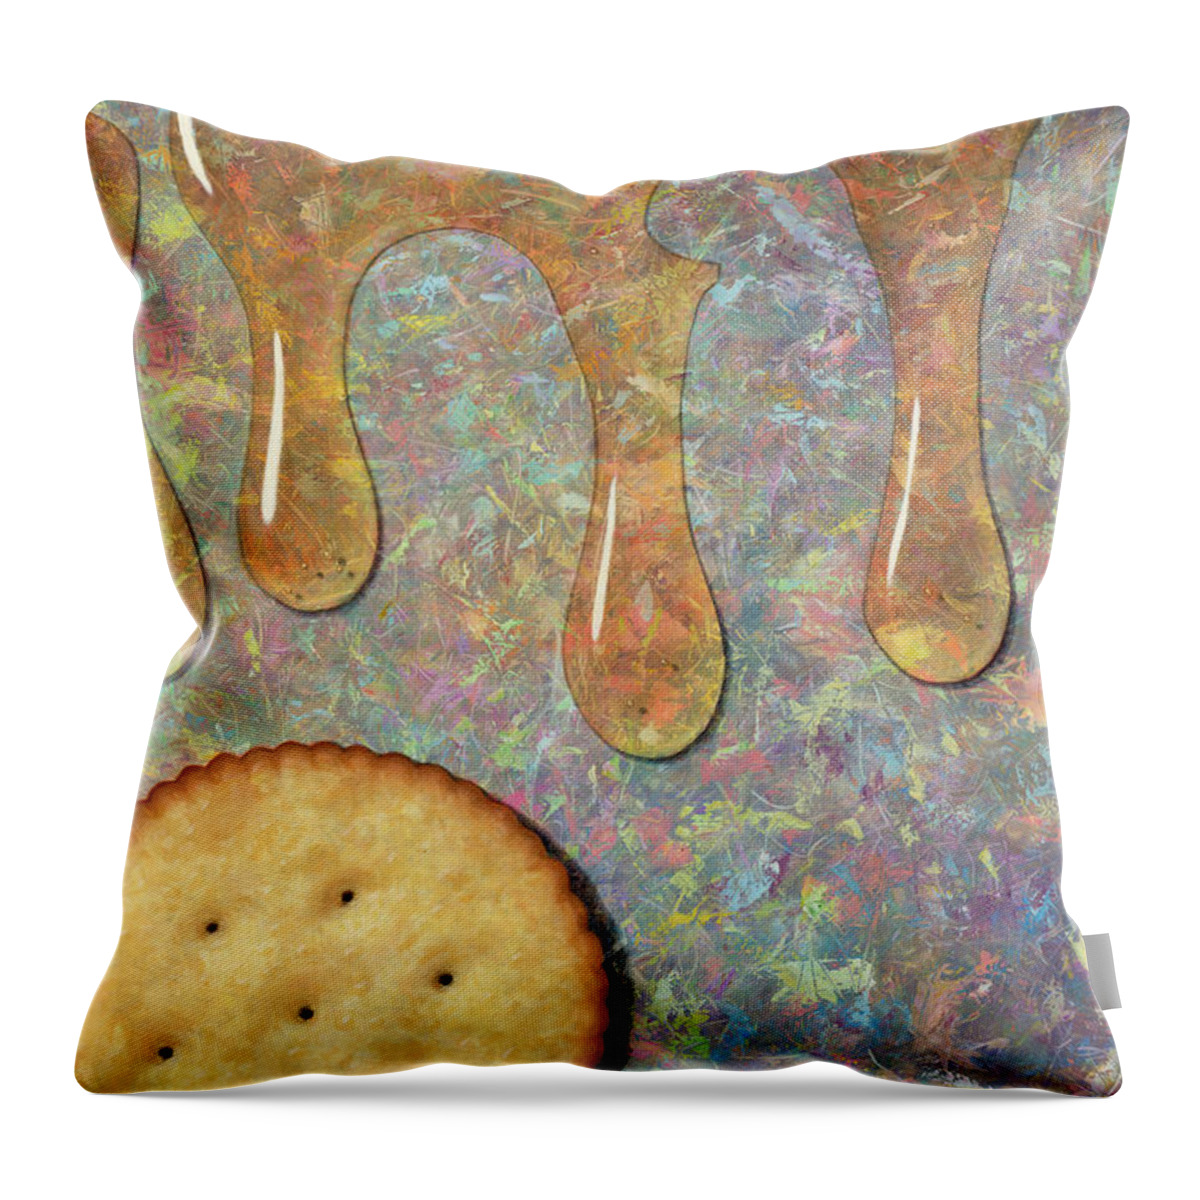 Cracker Throw Pillow featuring the painting Cracker Honey by James W Johnson